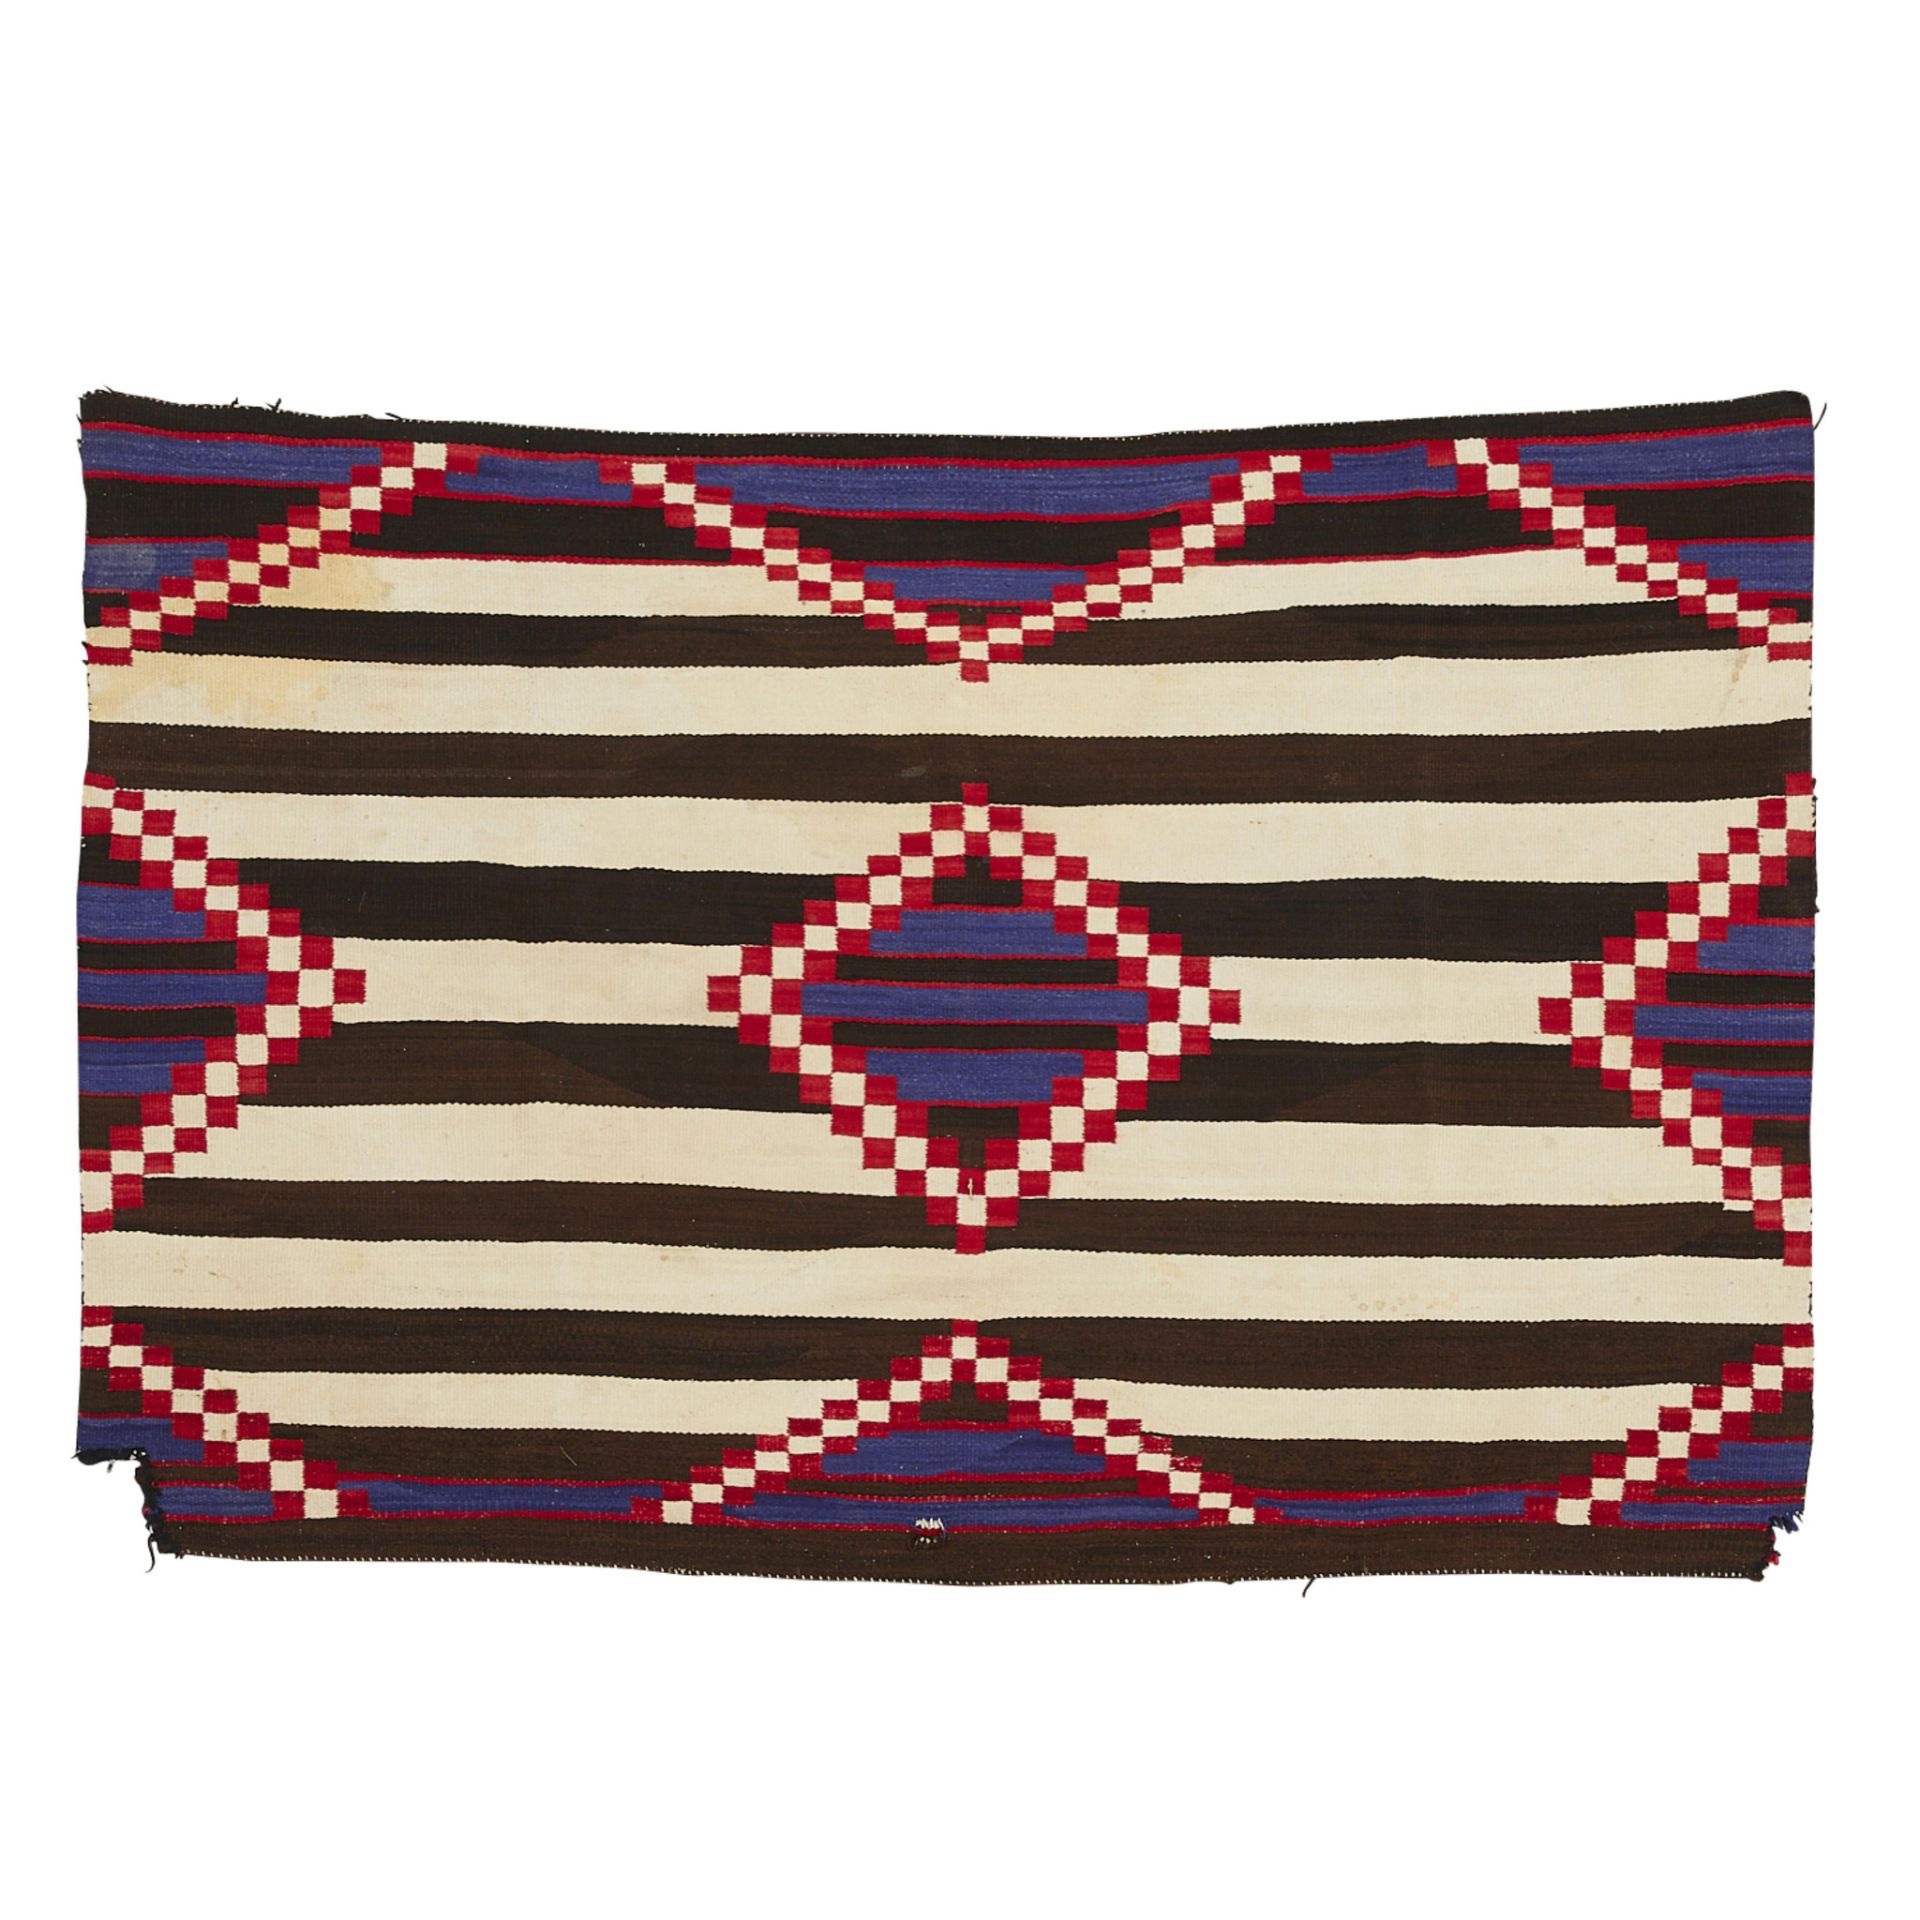 20th c. Navajo Chief's Revival Blanket 6' x 4' - Image 3 of 10